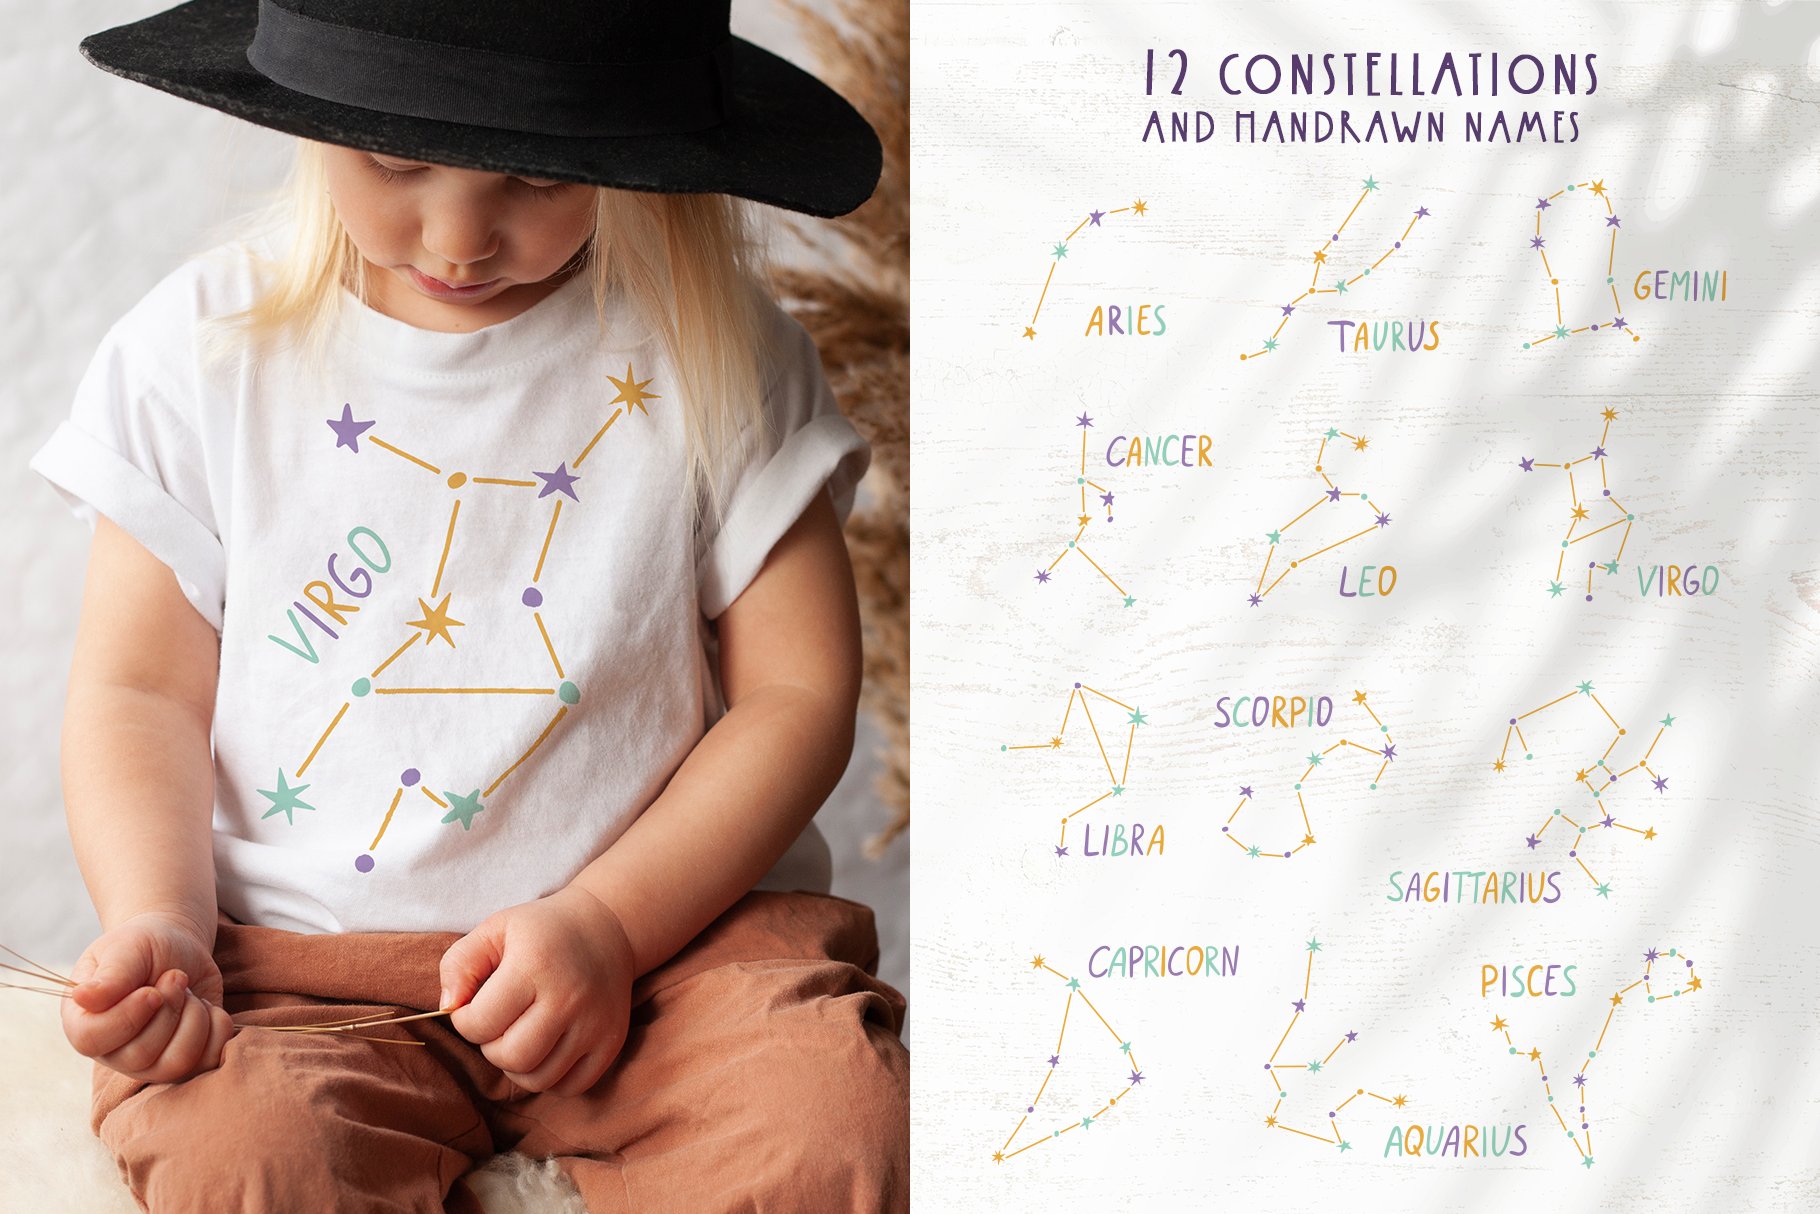 White t-shirt for the different constellations.